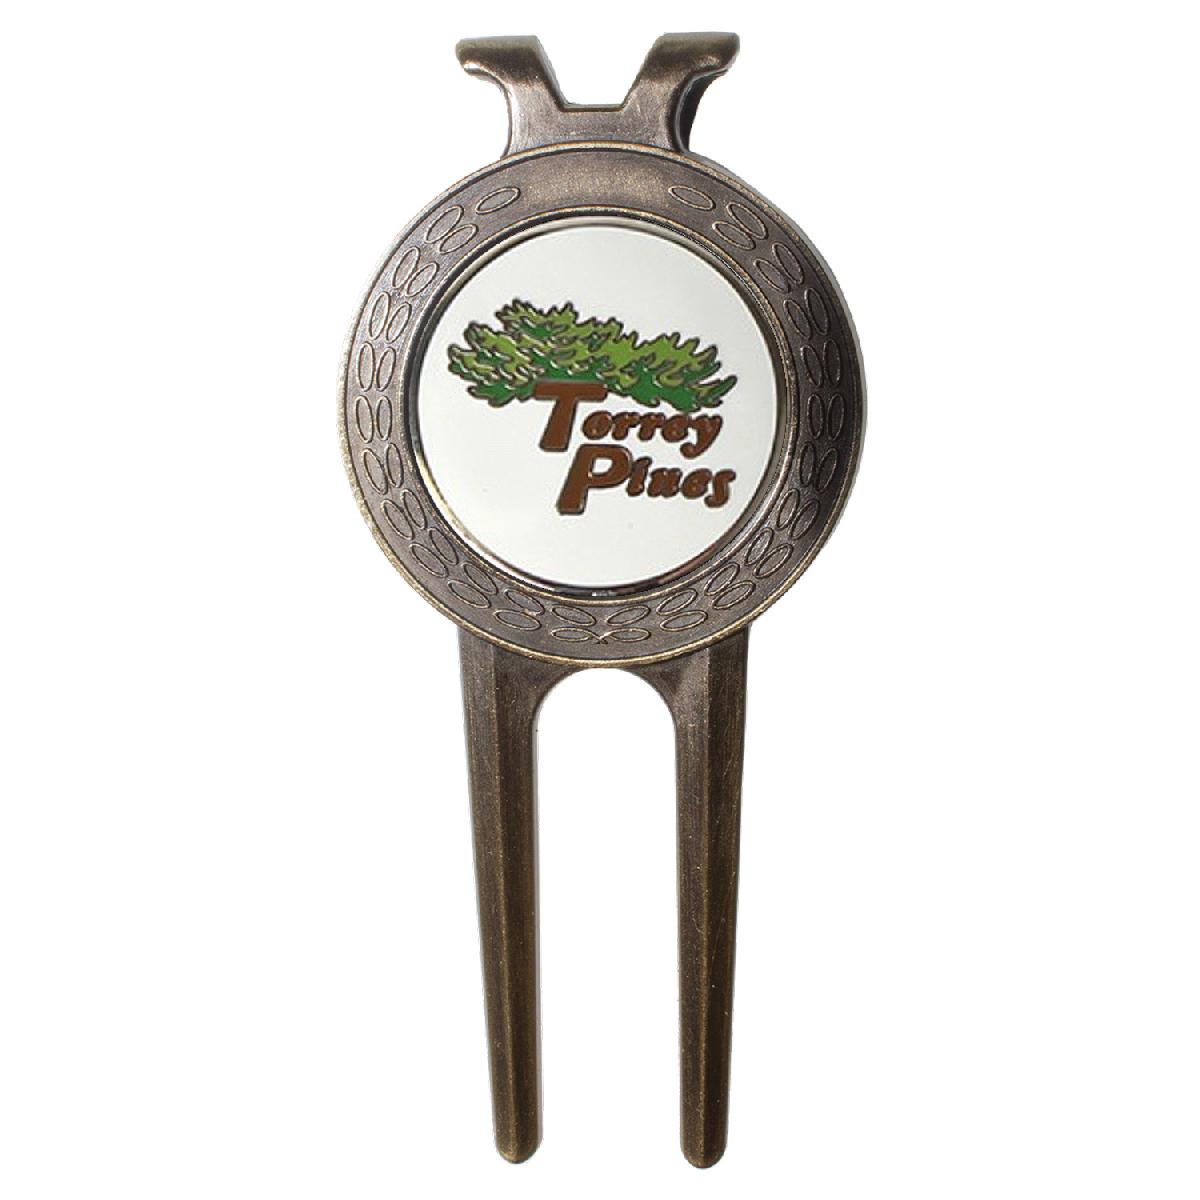 Classic Divot Repair Tool with Ball Marker and Belt Clip - Die Struck Logo